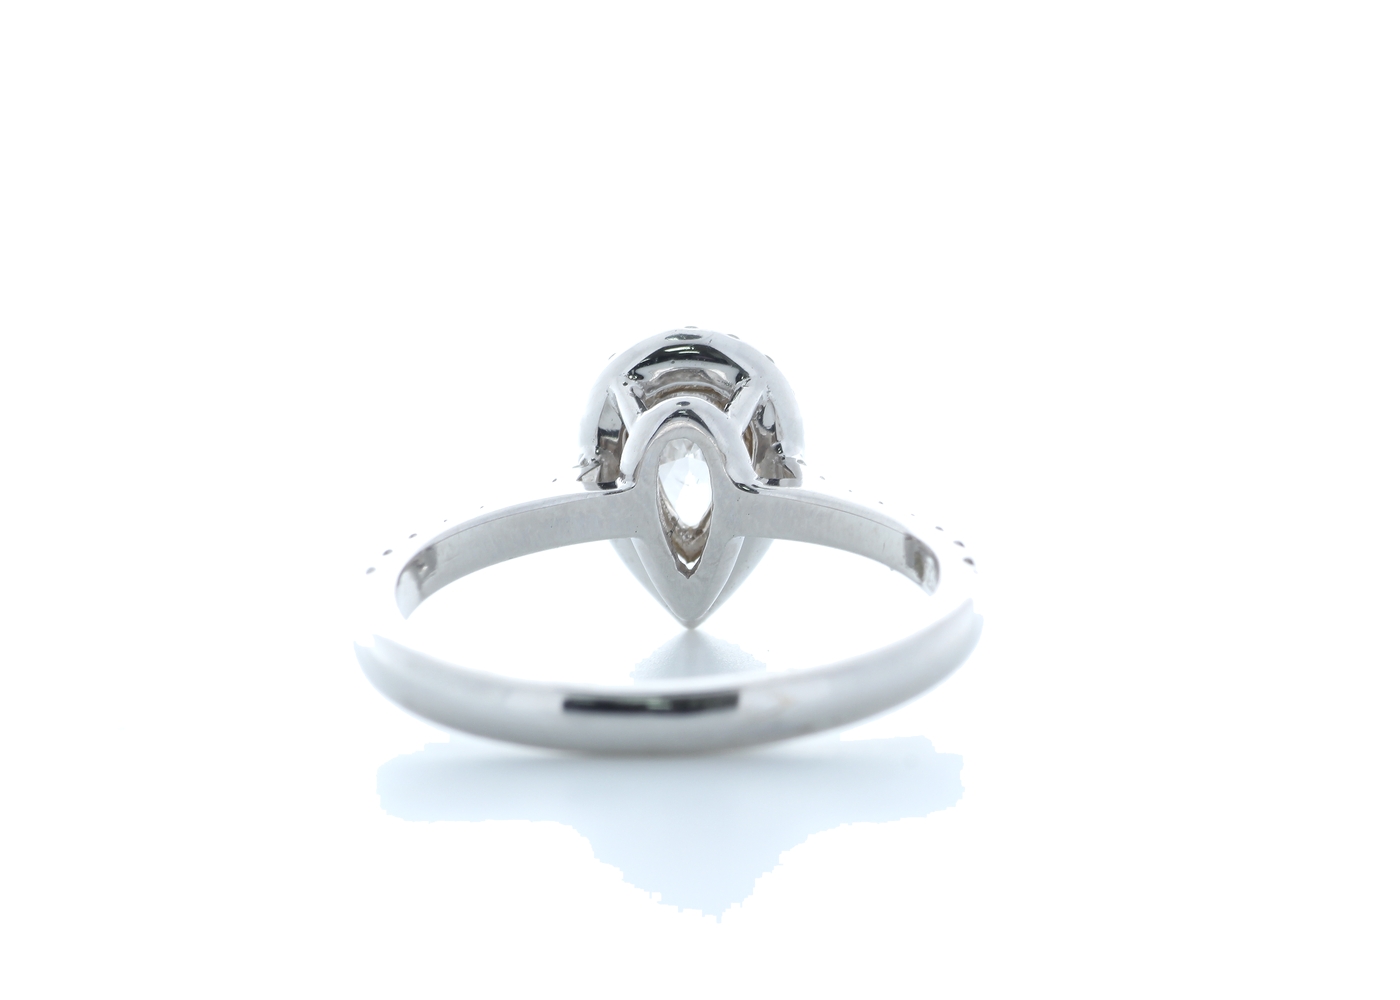 18ct White Gold Single Stone With Halo Setting Ring 0.91 (0.51) Carats - Image 3 of 5